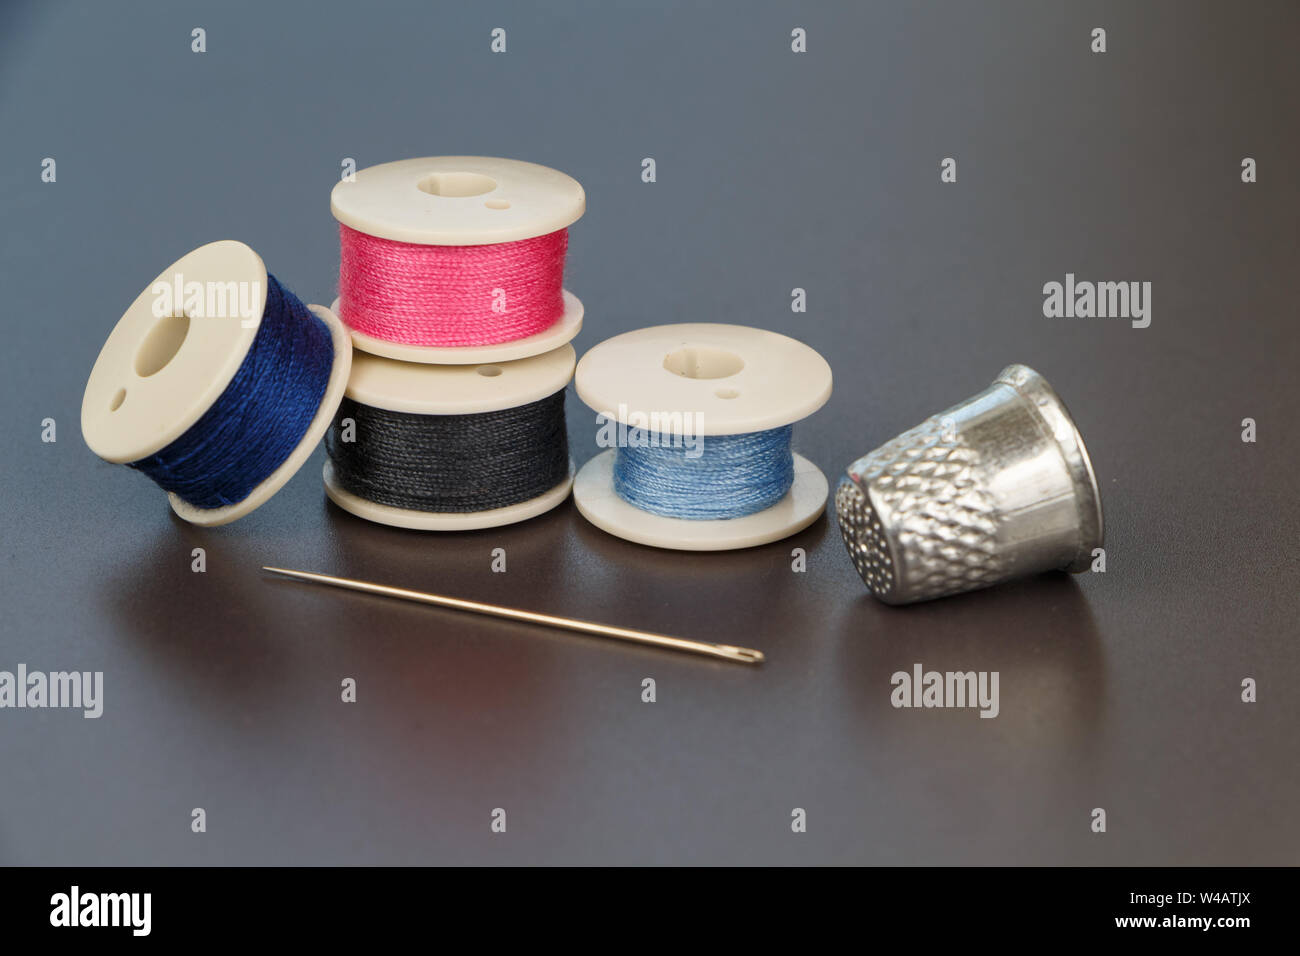 Blue, pink and gray reels of thread for sewing, needle and thimble Stock Photo